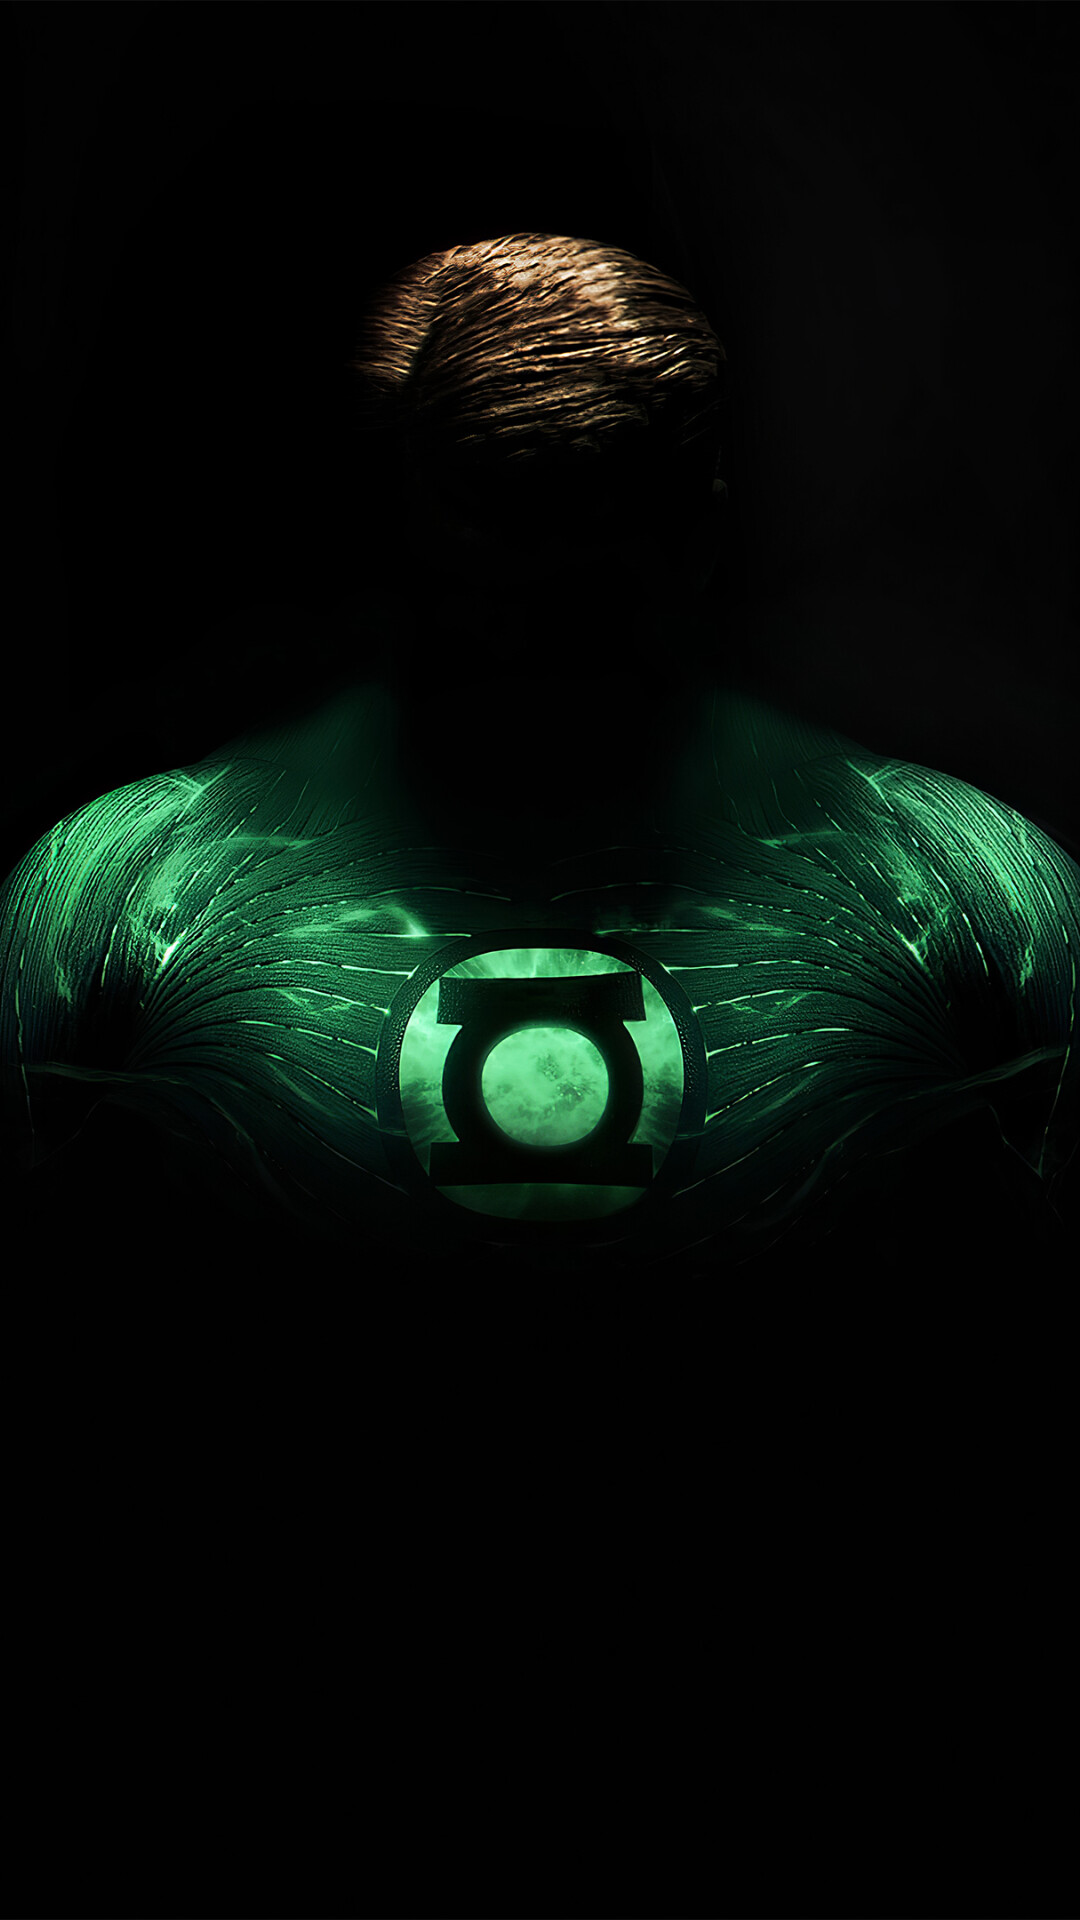 Green Lantern: DC Comics Superhero and one of the first to embrace the concept of a Legacy Character. 1080x1920 Full HD Wallpaper.